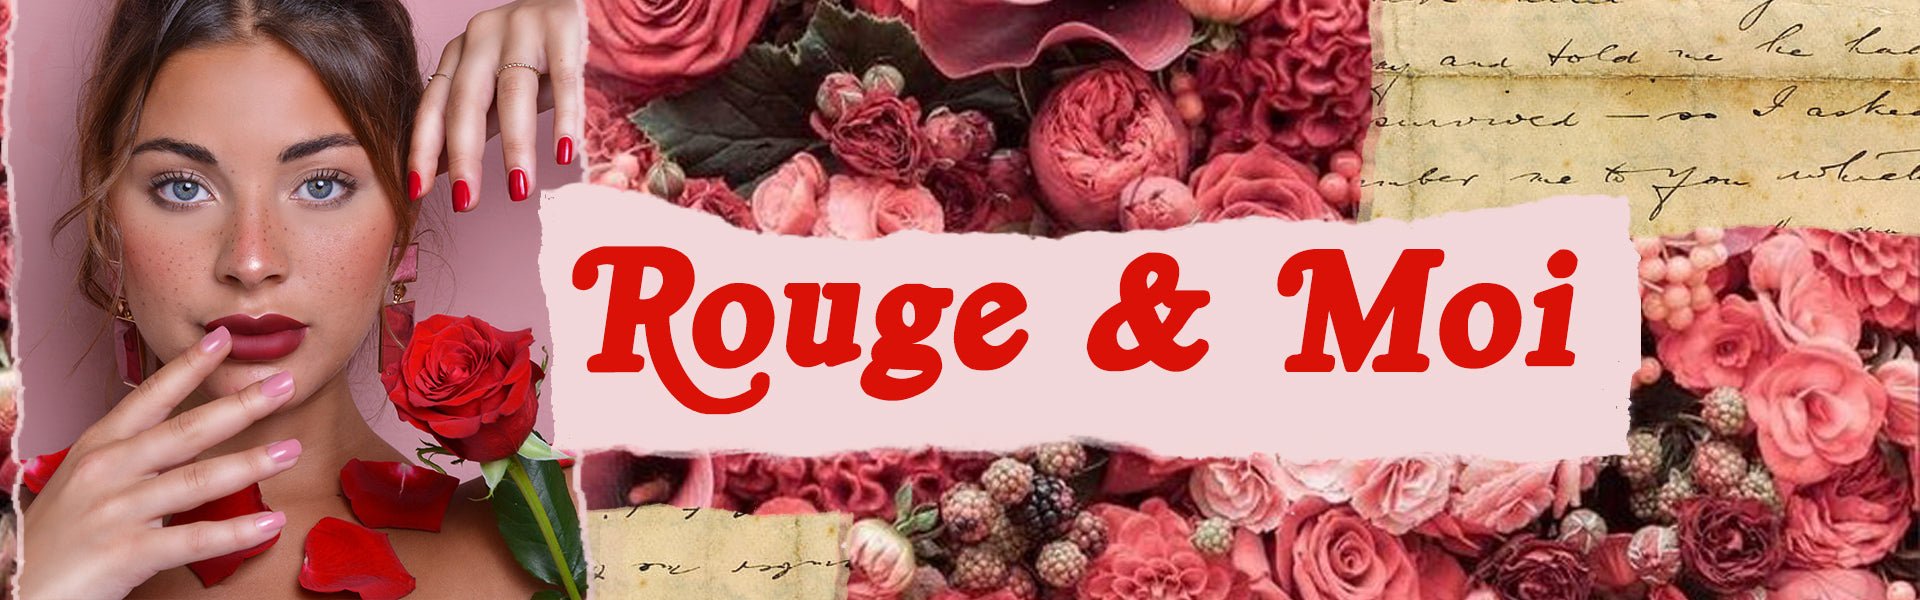 Rouge & Moi